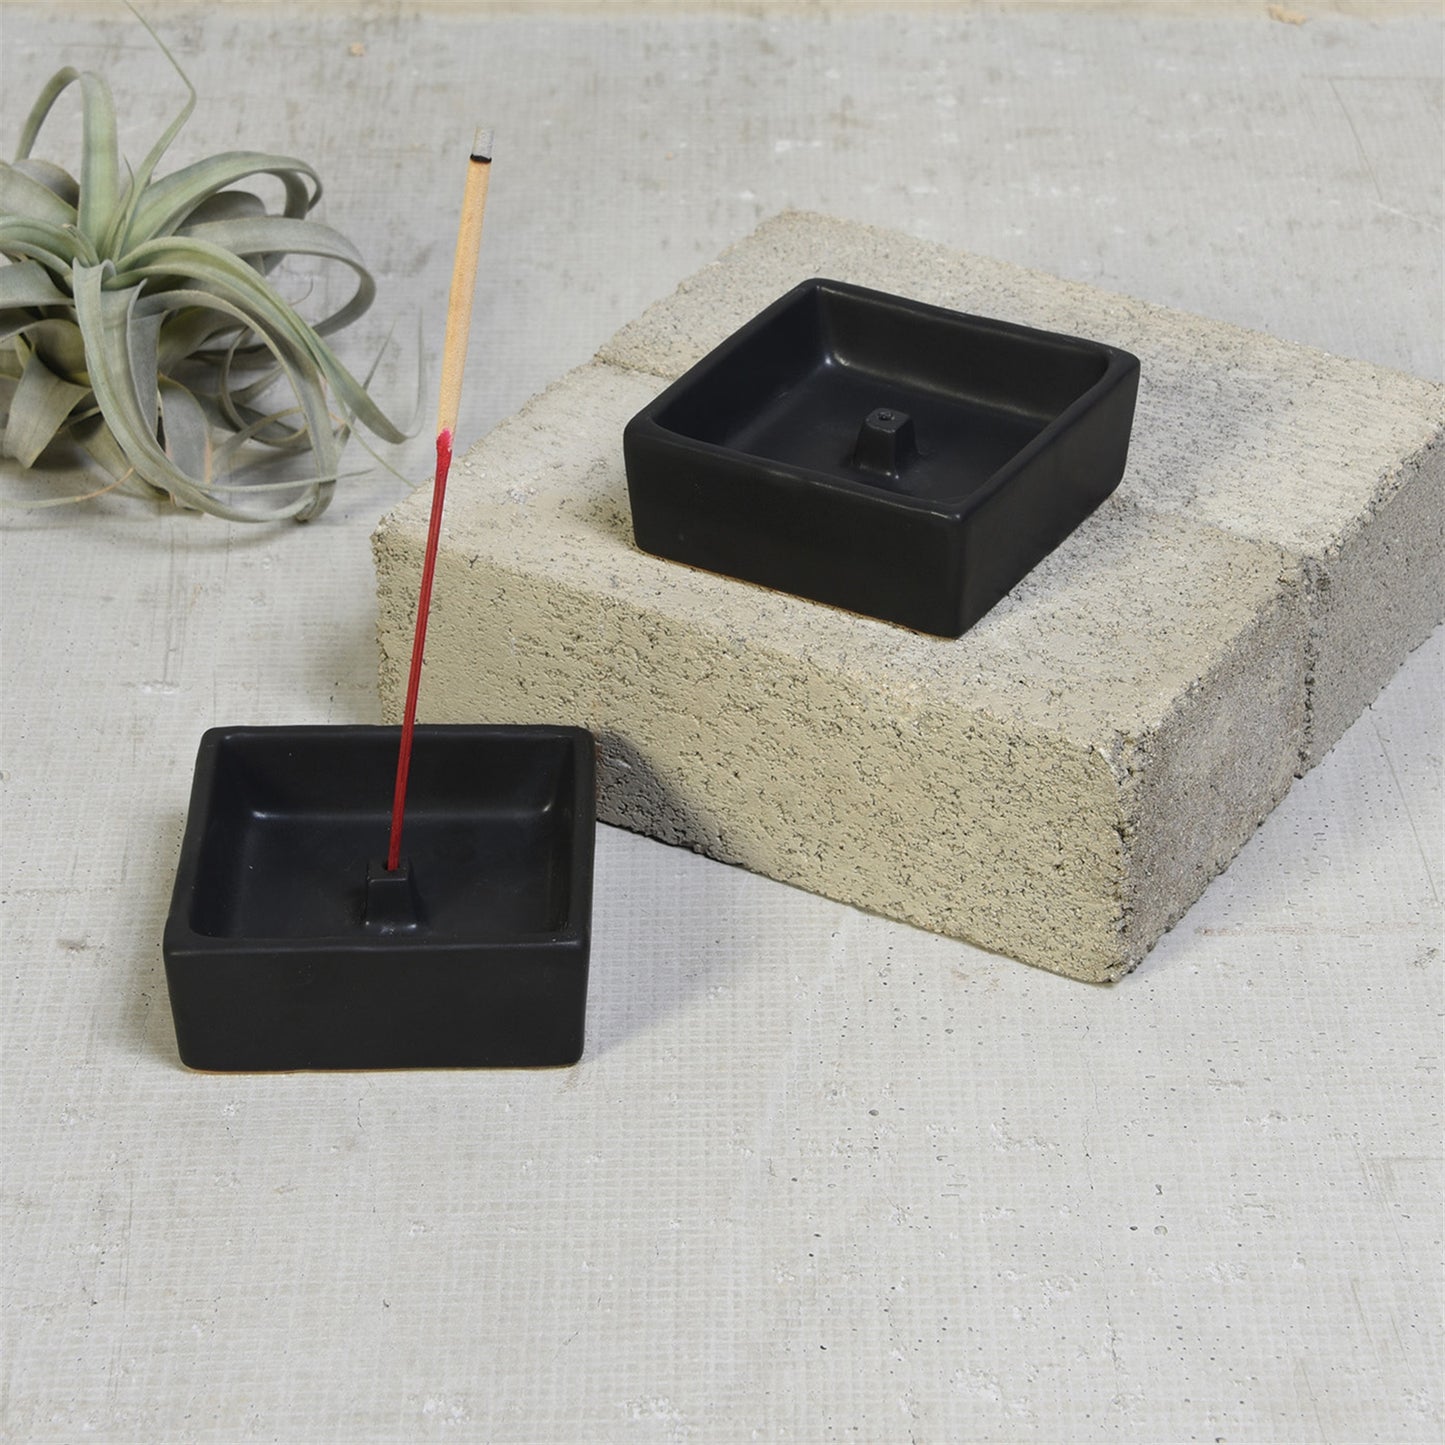 pair of mate black incense holder with incense stick on concrete with air plant in background